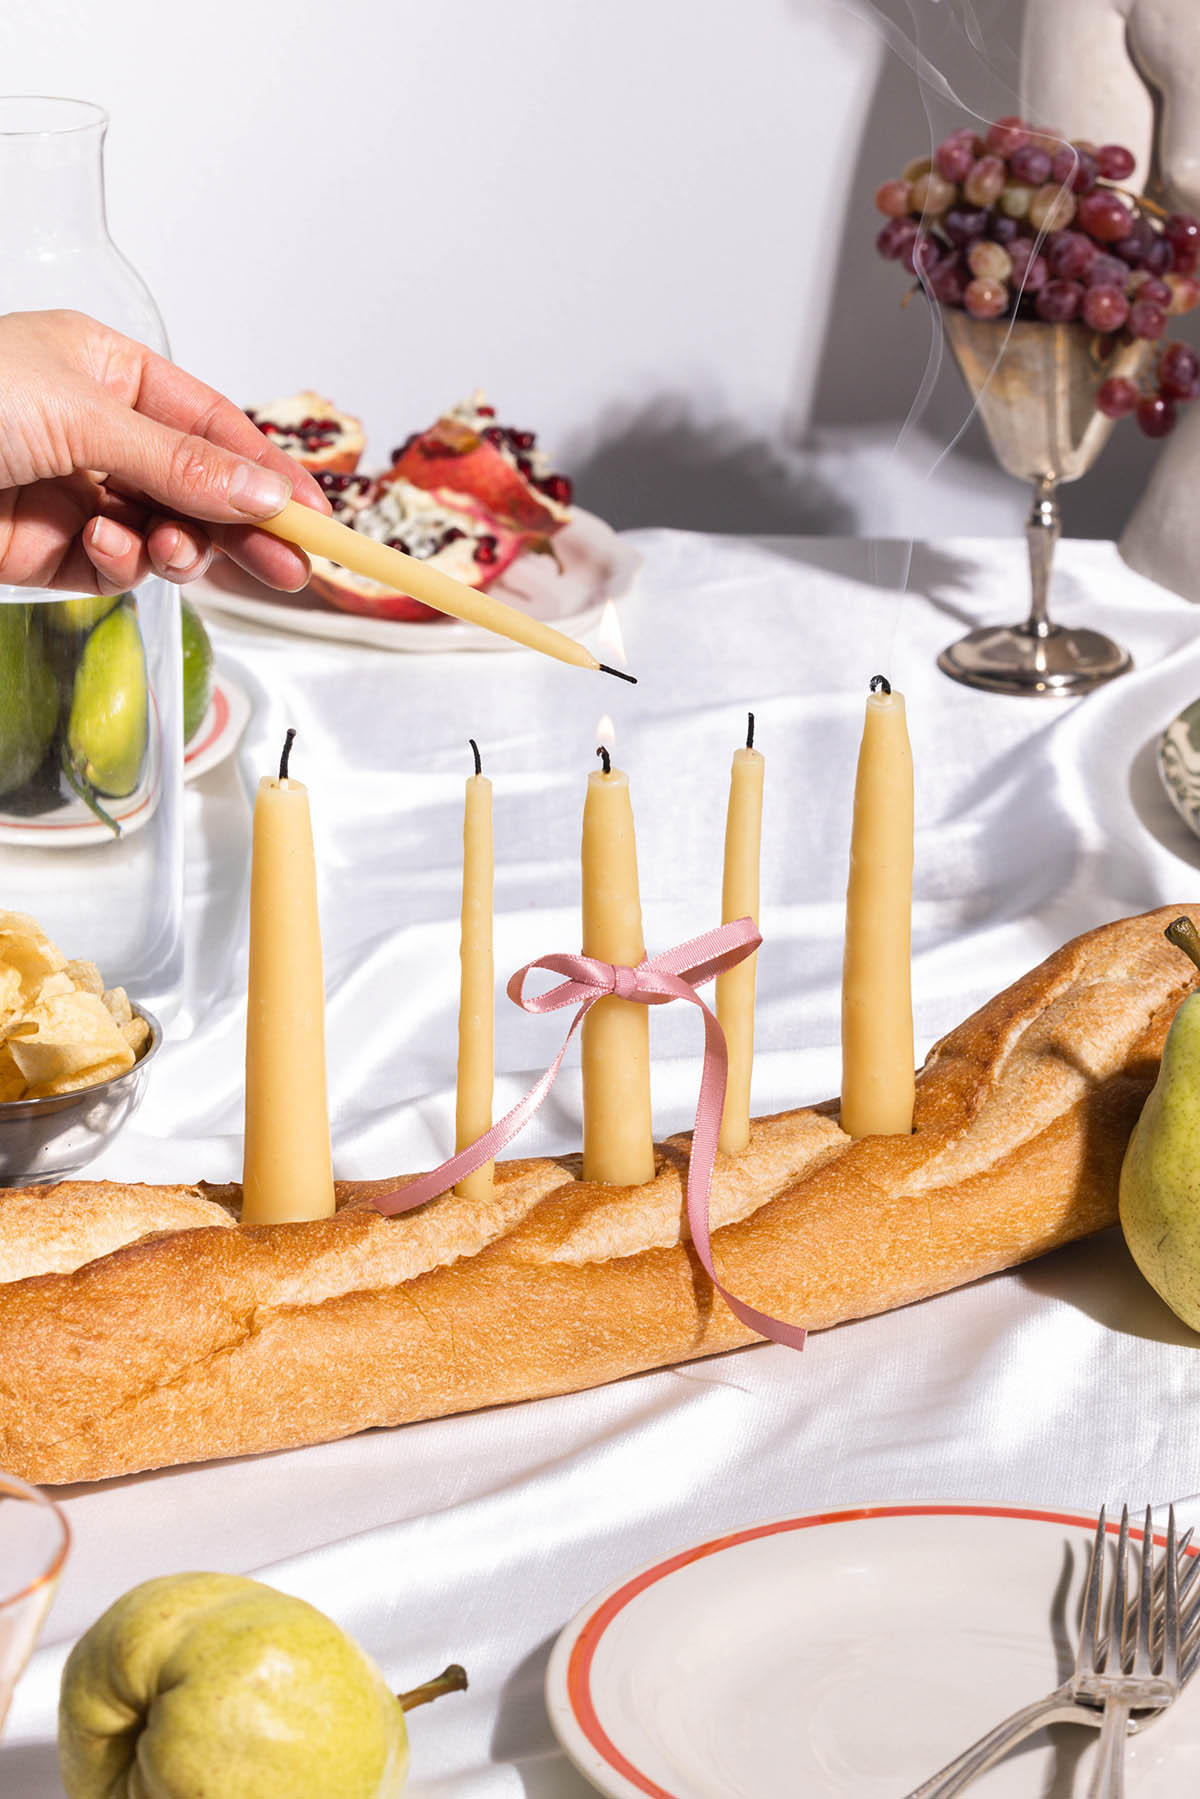 Using a candle to light another candle, beeswax tapers using a baguette as a holder.